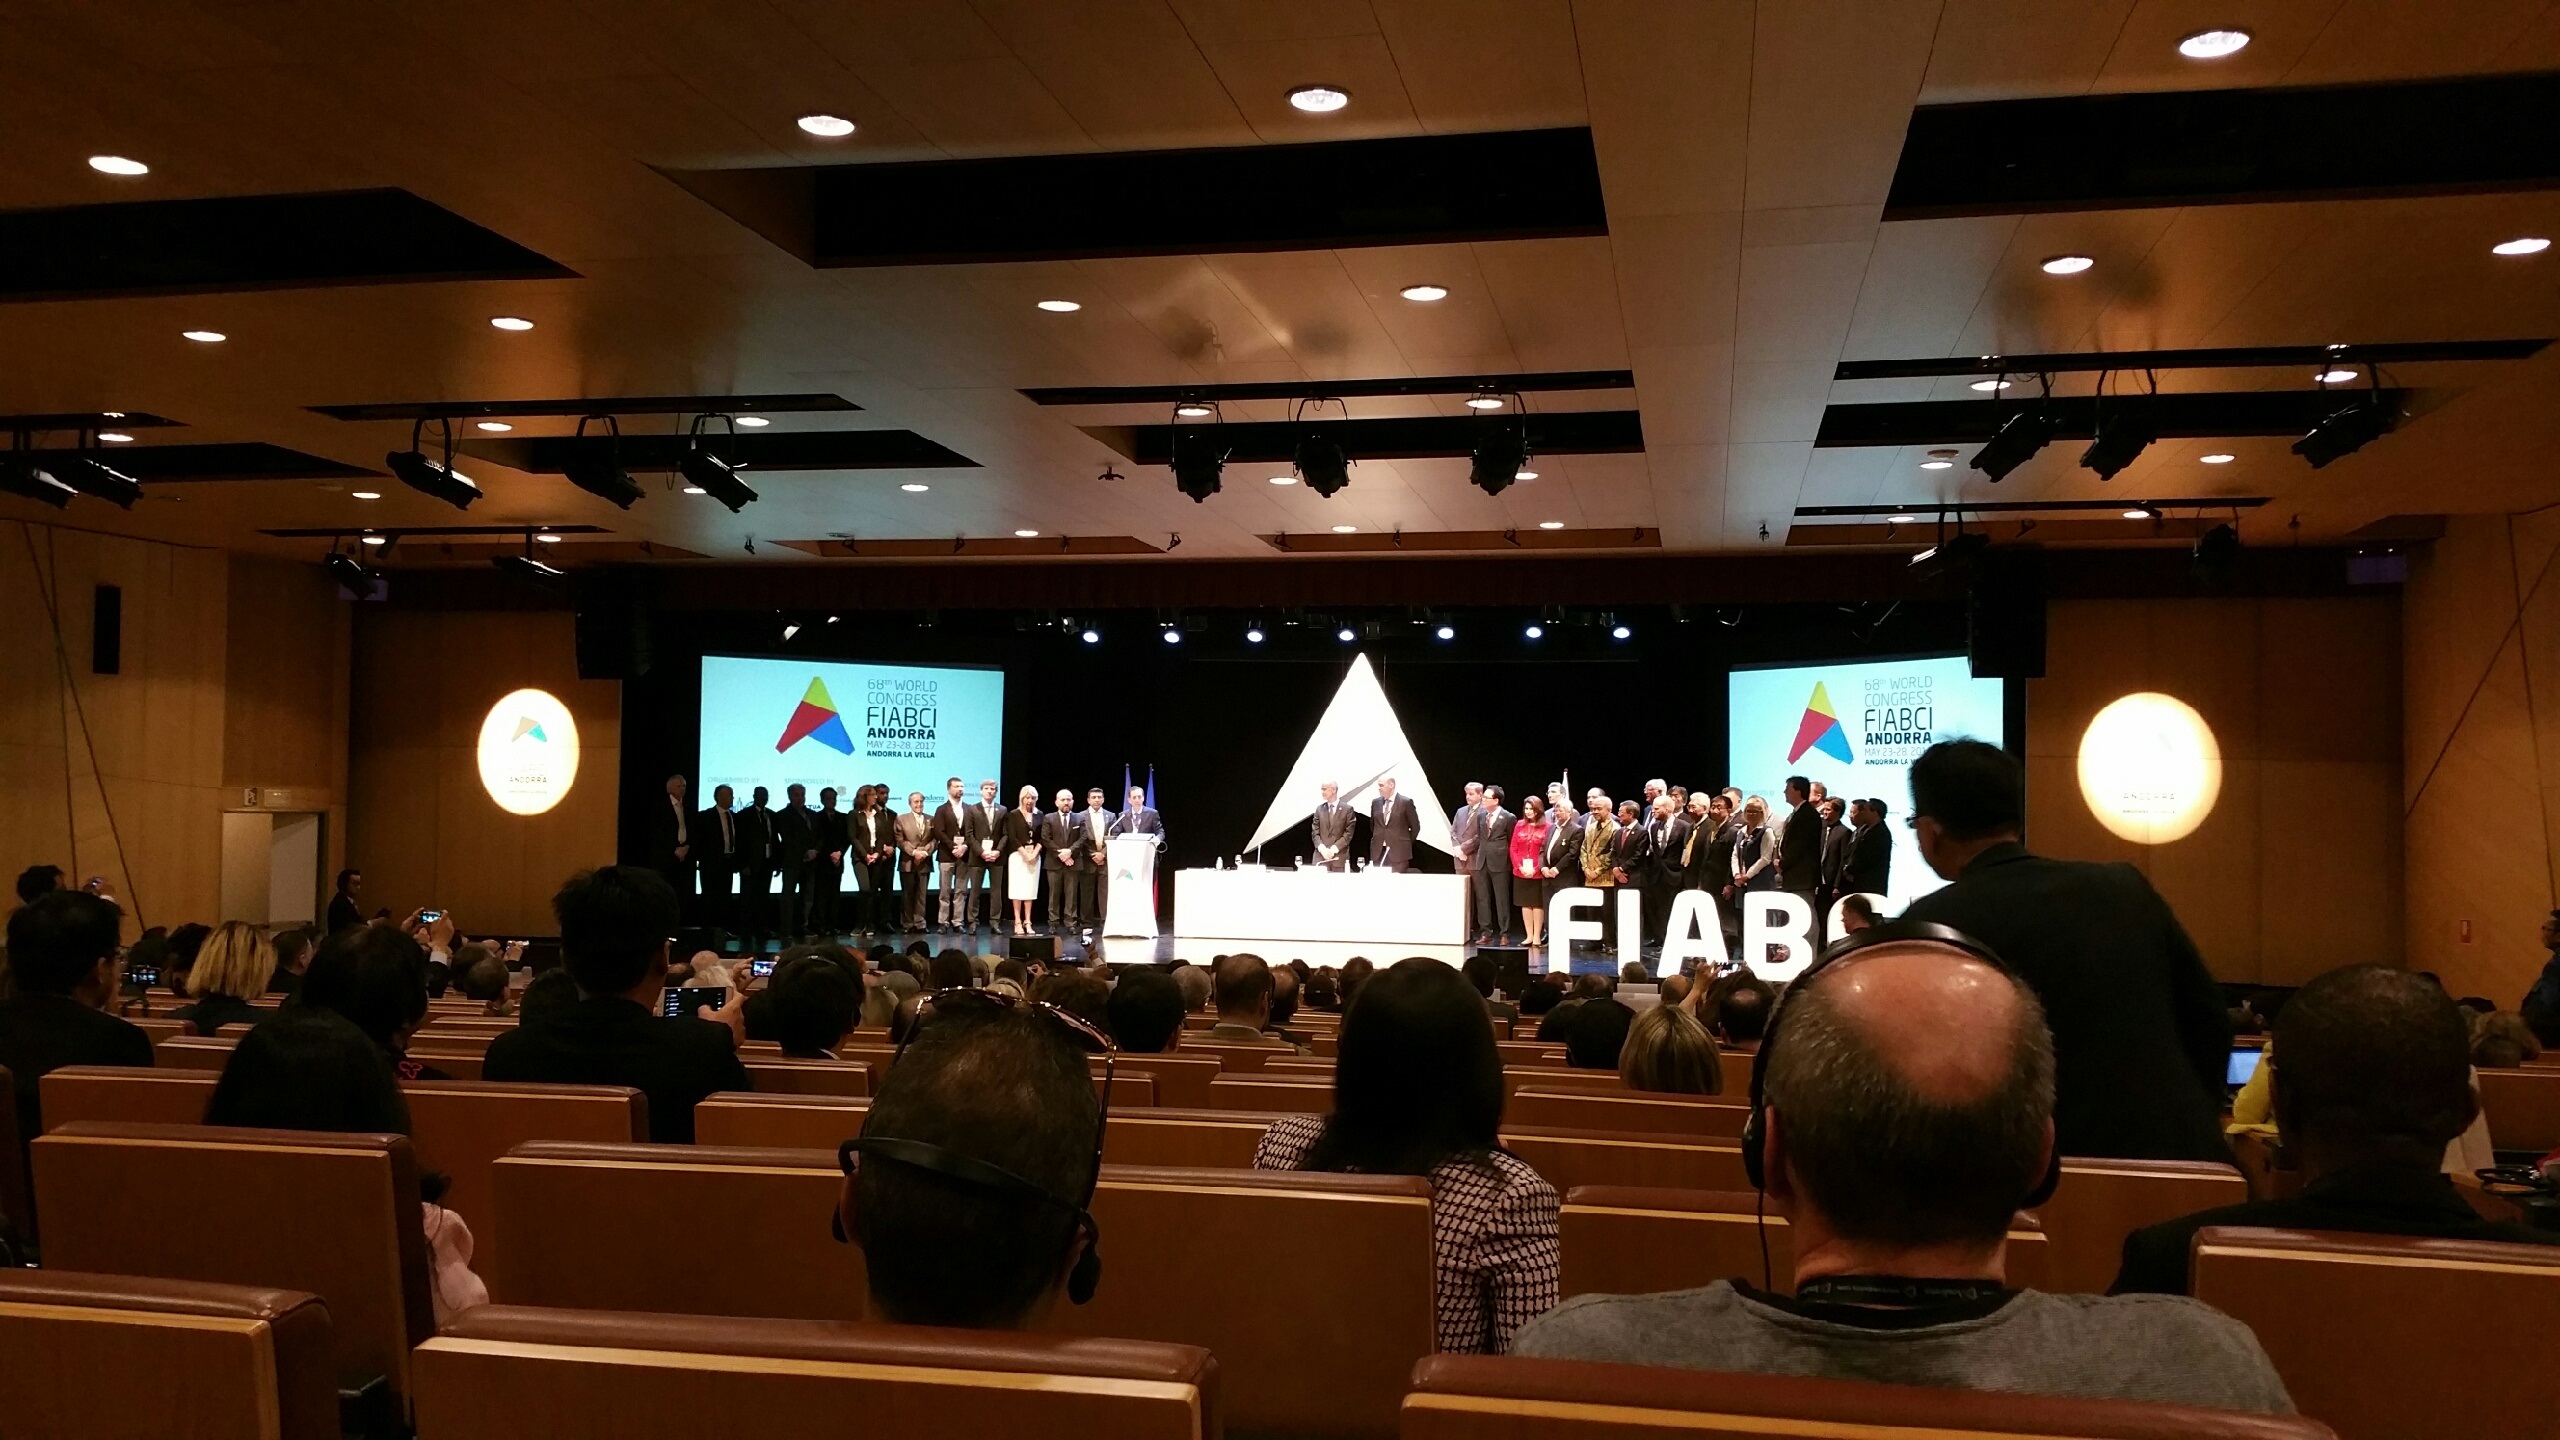 Opening Ceremony For The FIABCI  International Real Estate Federation